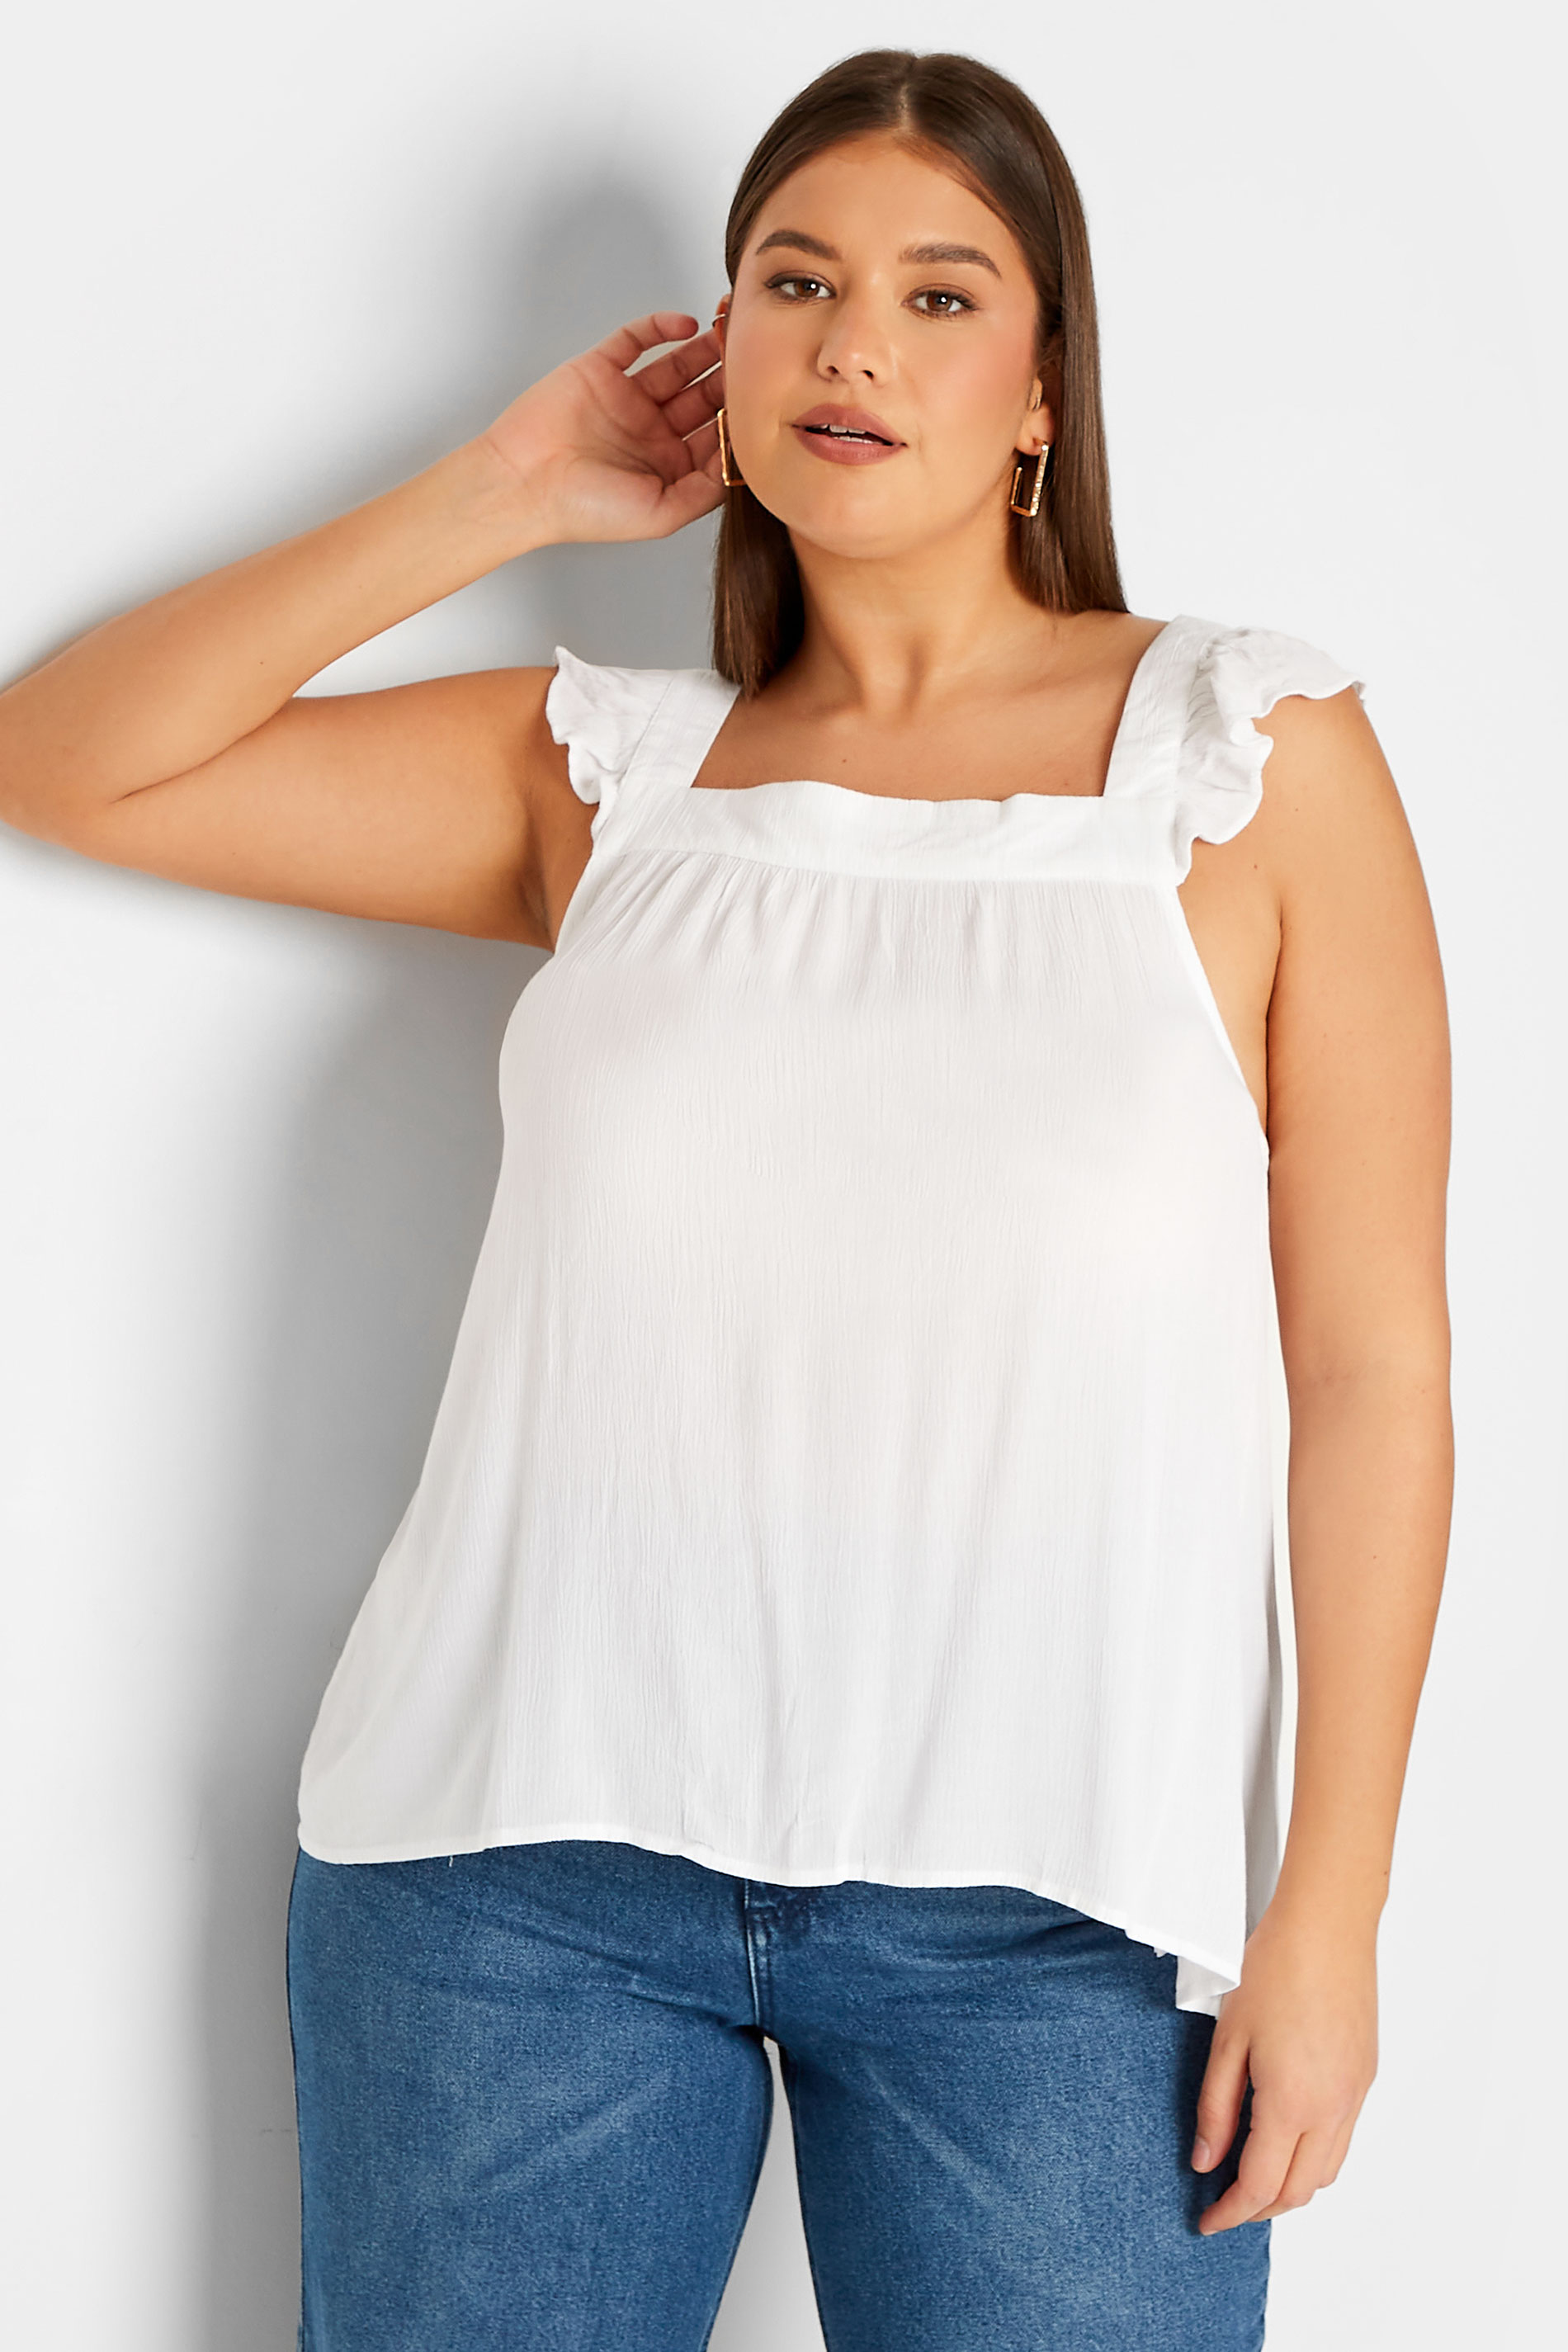 LTS Tall Women's White Crinkle Frill Top | Long Tall Sally 2